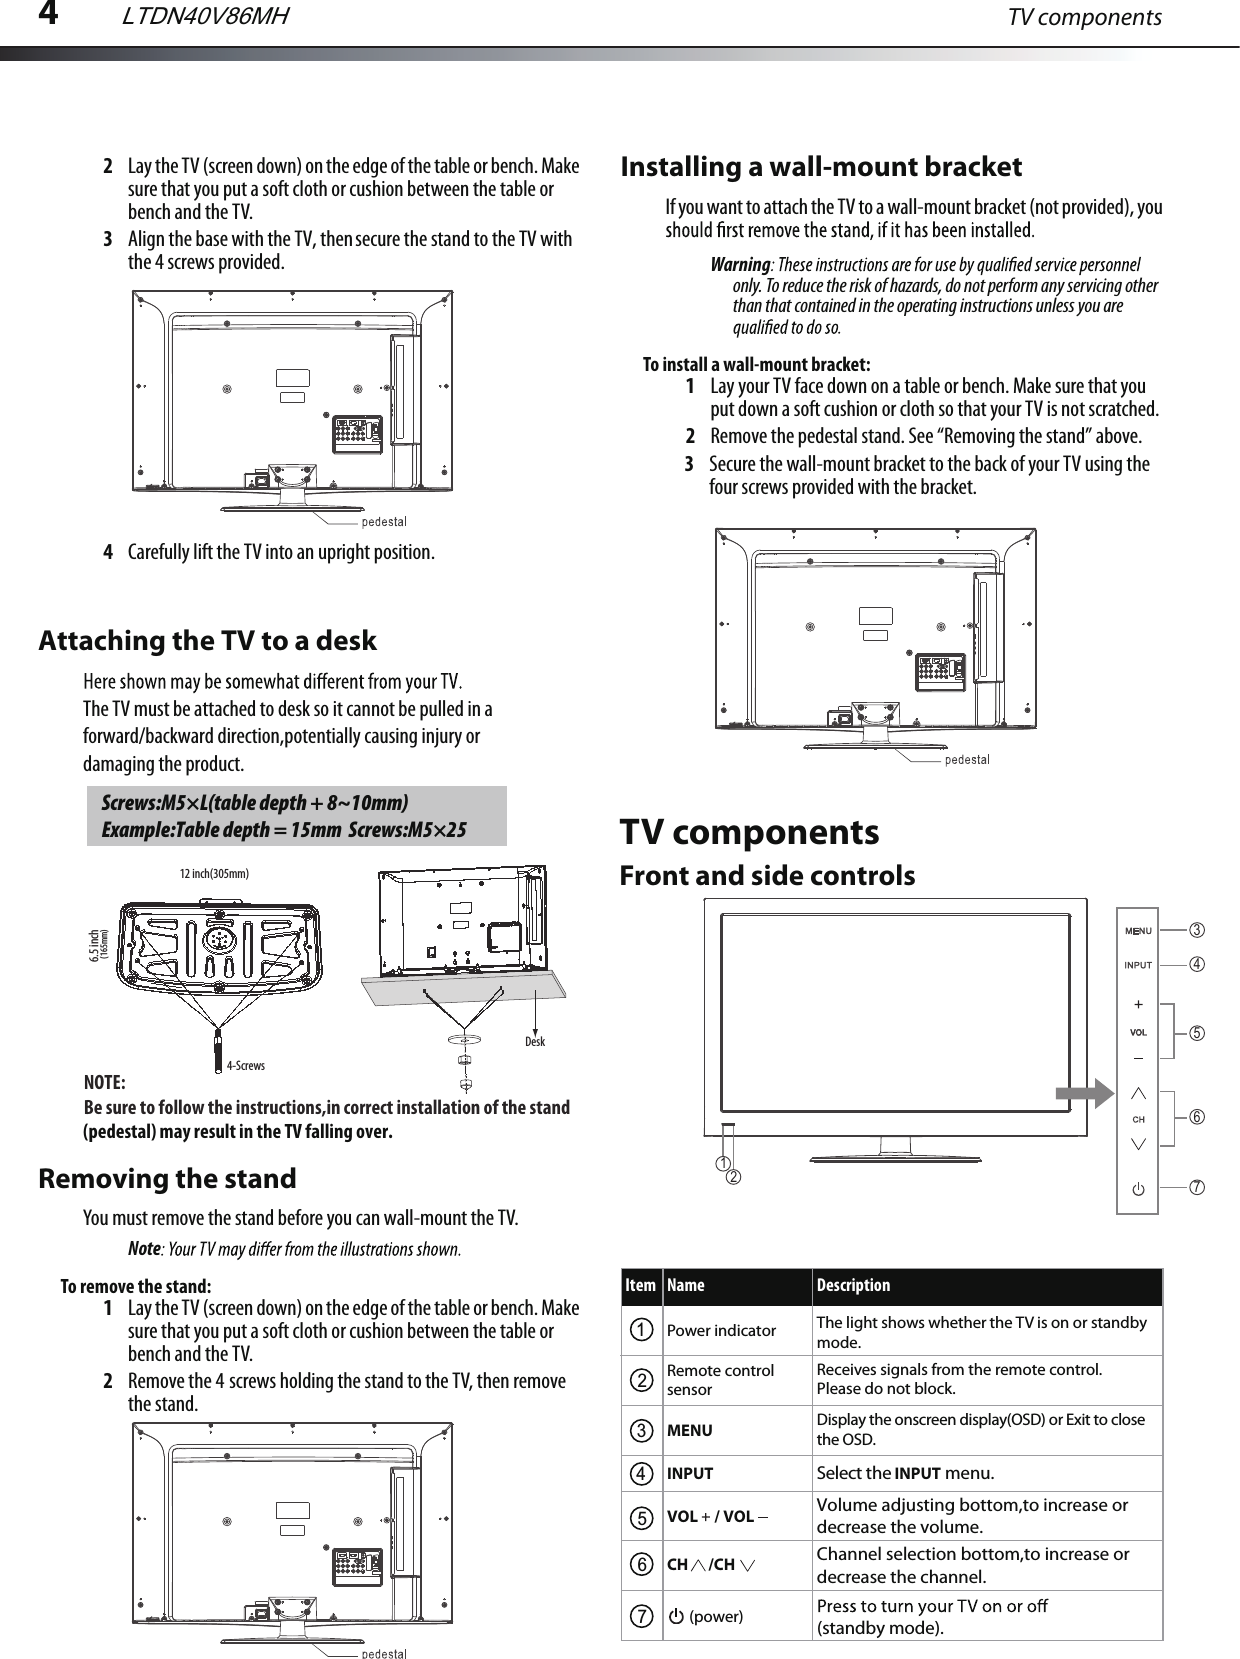 4TV components2Lay the TV (screen down) on the edge of the table or bench. Make sure that you put a soft cloth or cushion between the table or bench and the TV.3Align the base with the TV, then secure the stand to the TV with the 4 screws provided.4Carefully lift the TV into an upright position.The TV must be attached to desk so it cannot be pulled in a forward/backward direction,potentially causing injury ordamaging the product.(pedestal) may result in the TV falling over.Removing the standAttaching the TV to a deskYou must remove the stand before you can wall-mount the TV.NoteTo remove the stand:1Lay the TV (screen down) on the edge of the table or bench. Make sure that you put a soft cloth or cushion between the table or bench and the TV.2Remove the 4 screws holding the stand to the TV, then remove the stand.Installing a wall-mount bracketIf you want to attach the TV to a wall-mount bracket (not provided), you Warningonly. To reduce the risk of hazards, do not perform any servicing other than that contained in the operating instructions unless you are To install a wall-mount bracket:1Lay your TV face down on a table or bench. Make sure that you put down a soft cushion or cloth so that your TV is not scratched.2Remove the pedestal stand. See “Removing the stand” above.3Secure the wall-mount bracket to the back of your TV using the four screws provided with the bracket.TV componentsScrews:M5×L(table depth + 8~10mm)Example:Table depth = 15mm  Screws:M5×25LTDN40V86MHNOTE:Be sure to follow the instructions,in correct installation of the stand12 inch(305mm)4-ScrewsDesk6.5 inch(165mm)Front and side controlsItem Name DescriptionPower indicator The light shows whether the TV is on or standby mode.Remote control sensorReceives signals from the remote control. Please do not block. MENU Display the onscreen display(OSD) or Exit to close the OSD.INPUT Select the INPUT menu. VOL / VOL Volume adjusting bottom,to increase or decrease the volume. Channel selection bottom,to increase or decrease the channel. CH (power) (standby mode).56712341243756/CH